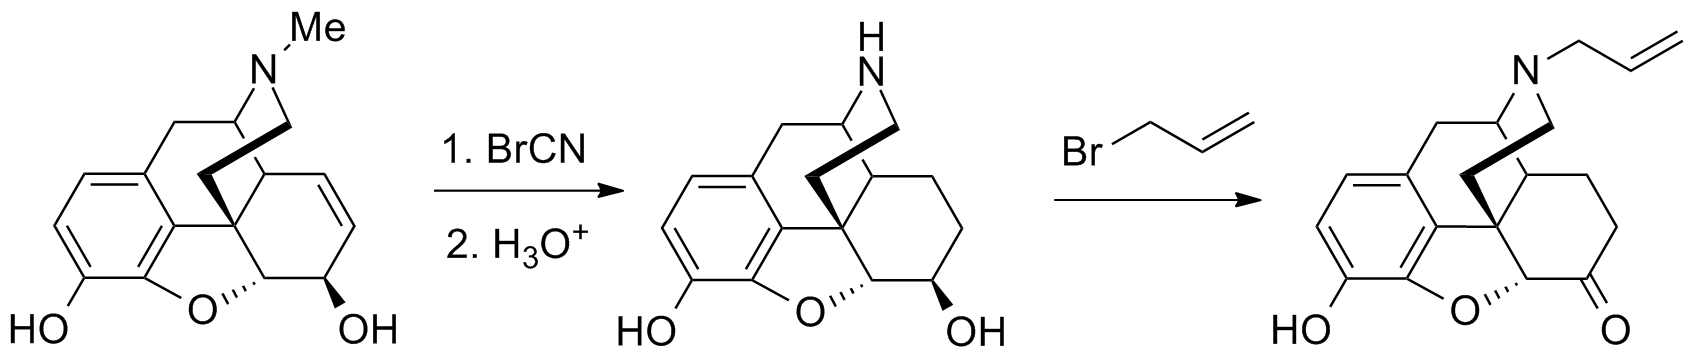 File:Nalorphine synthesis.png